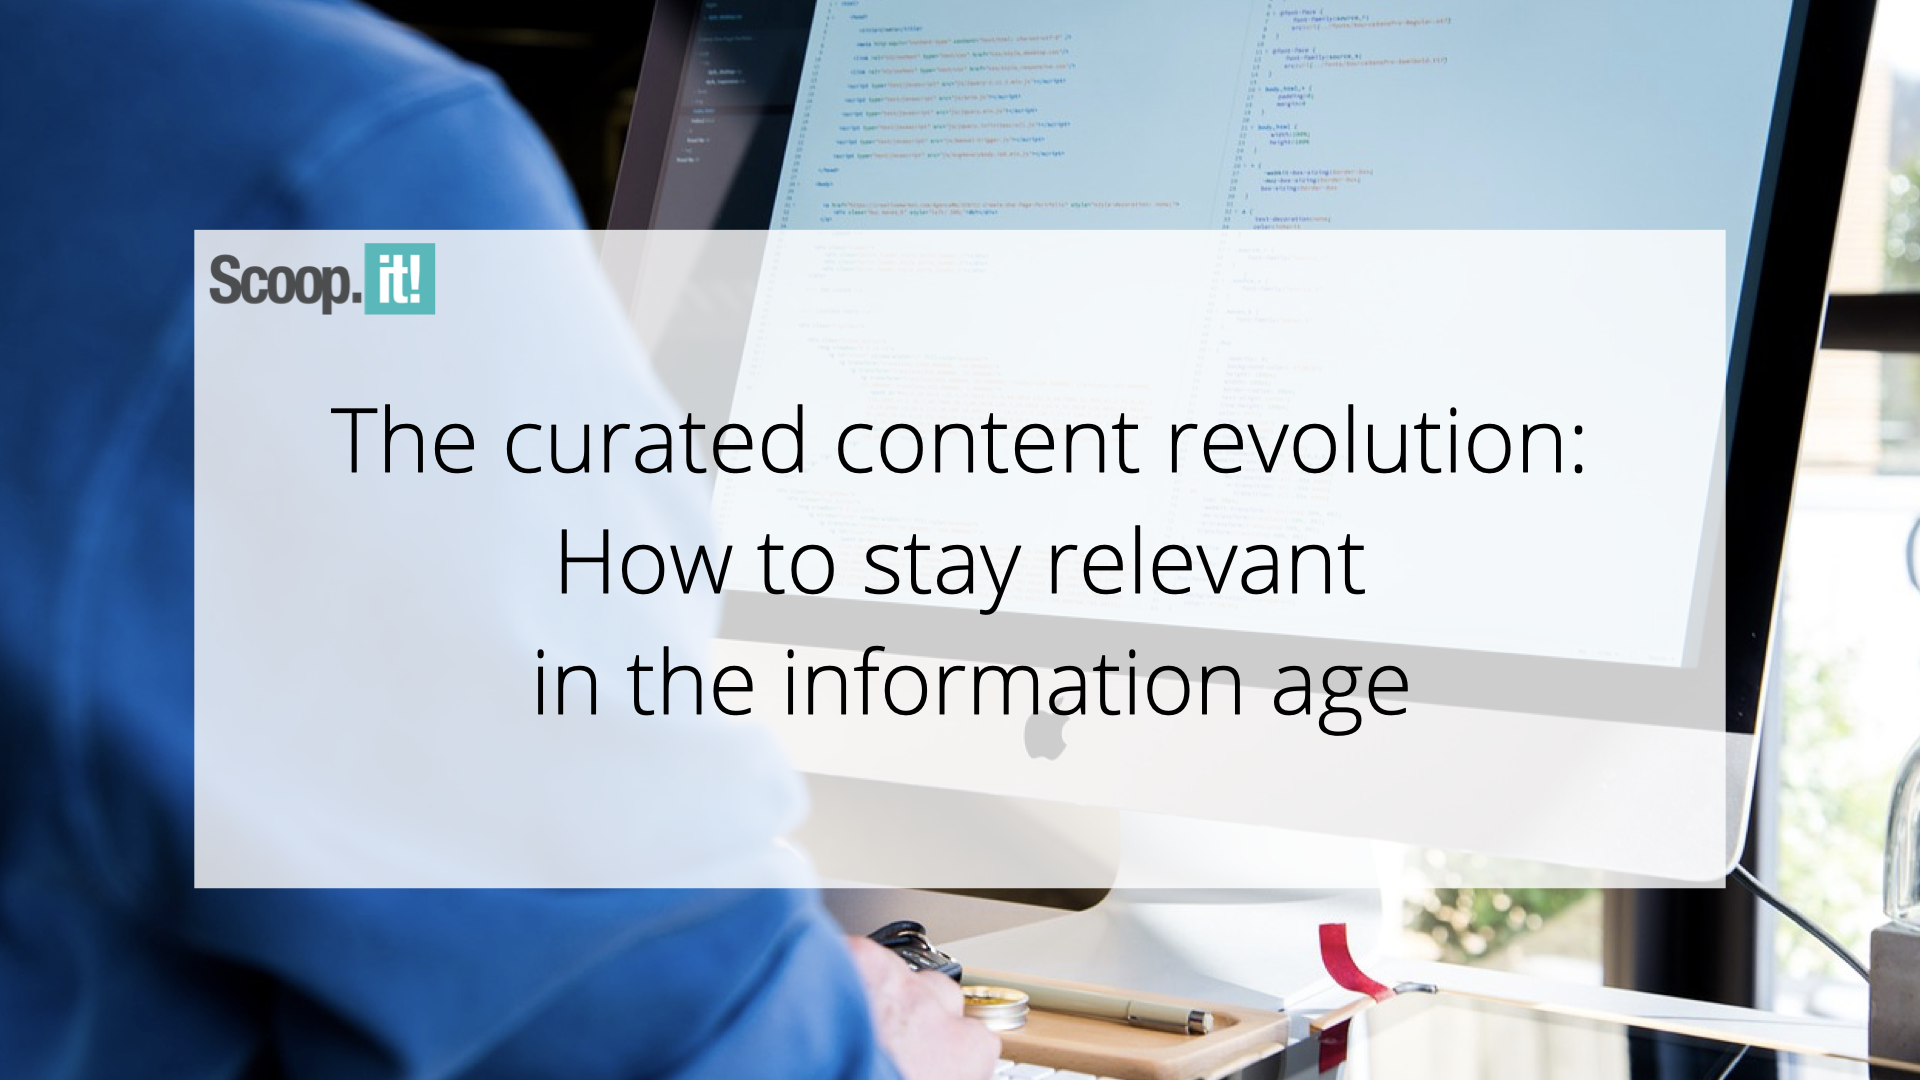 the-curated-content-revolution:-how-to-stay-relevant-in-the-information-age-–-scoop.it-blog